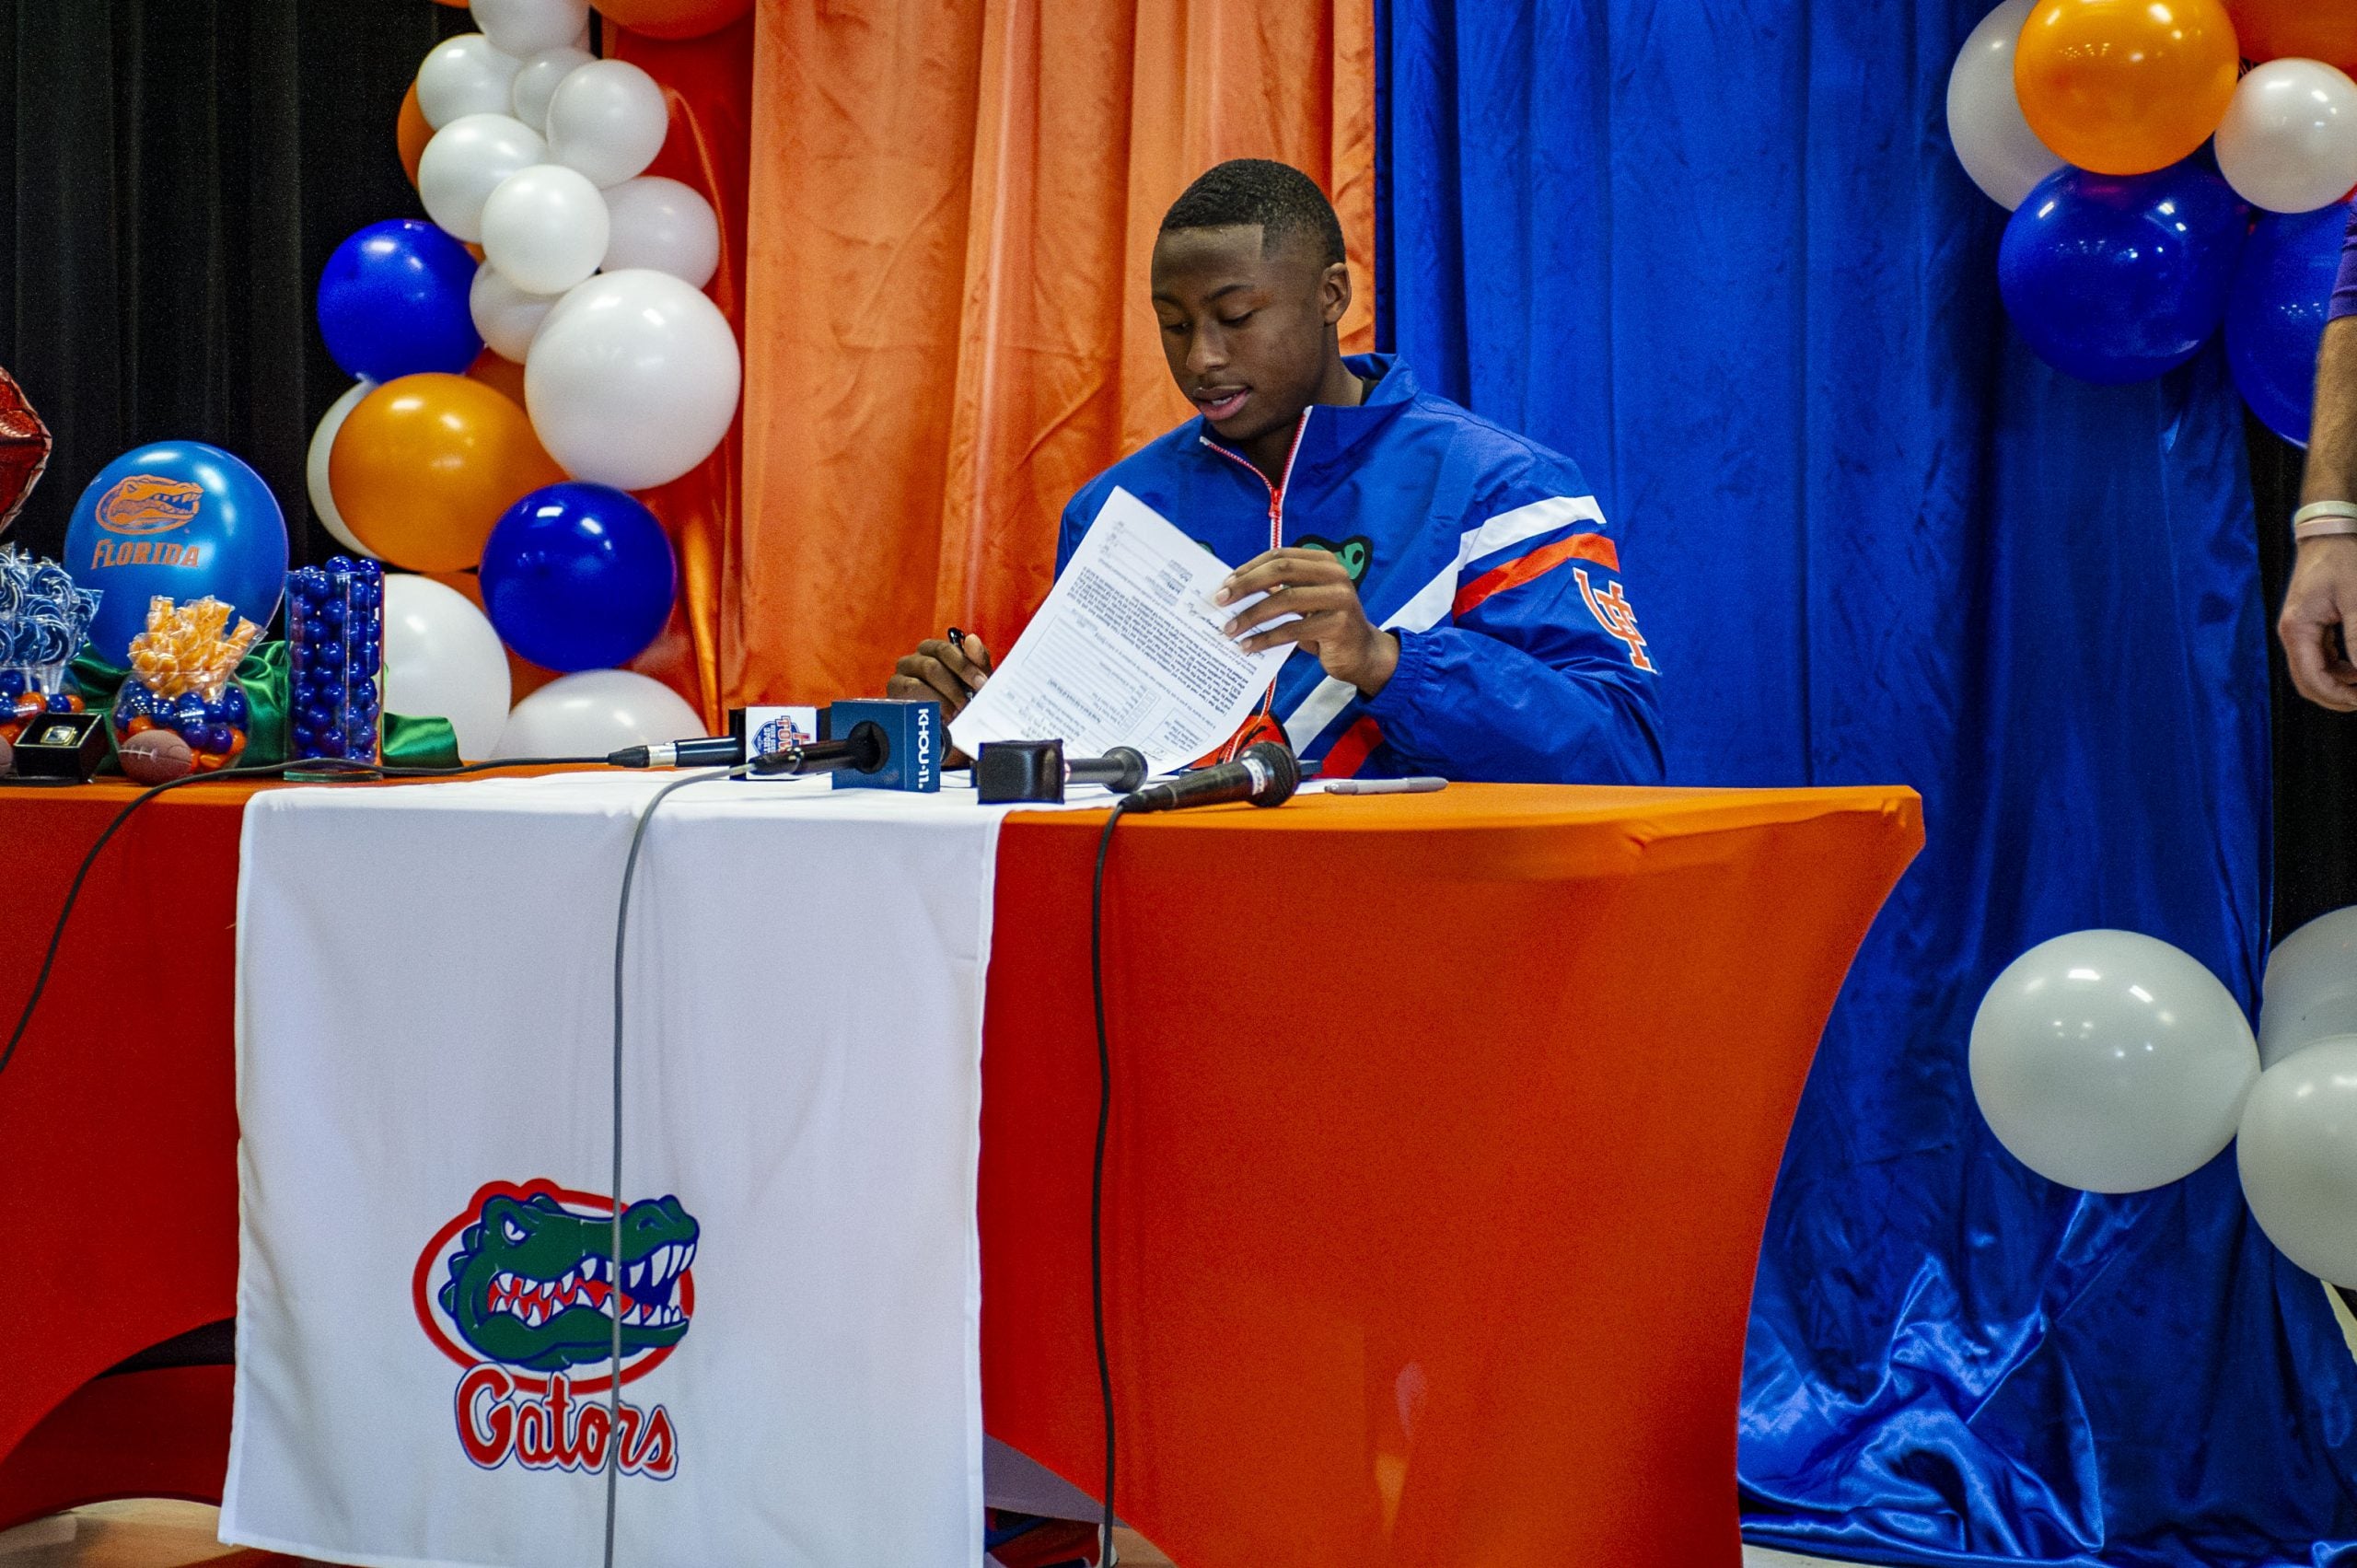 NAACP Tells Black Athletes To Reconsider Playing At Public Universities In Florida Over Anti-DEI Policies